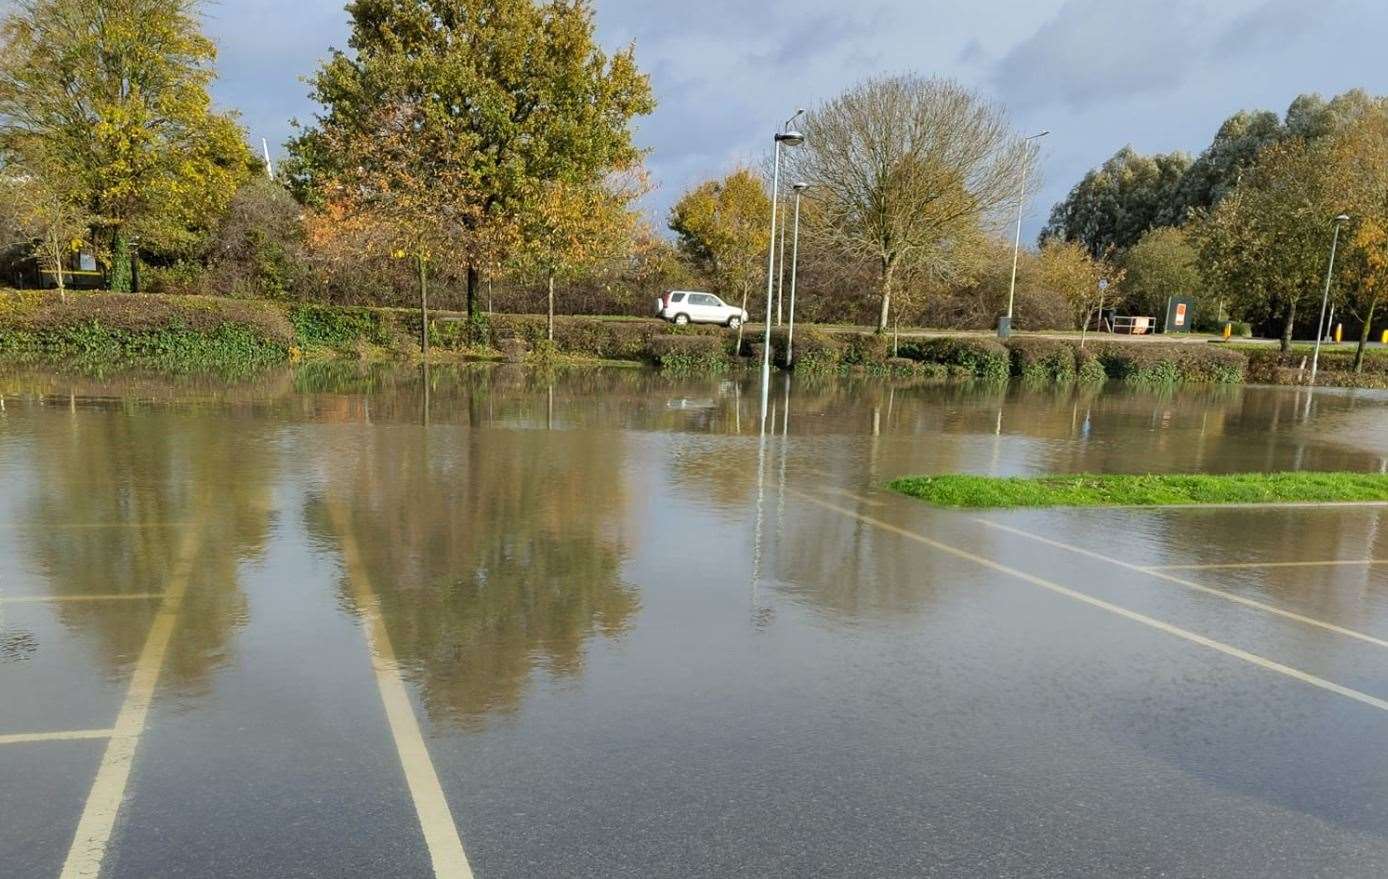 The Gallagher Retail Park car park was flooded after heavy rain last week. Picture: Roxy Tuohy